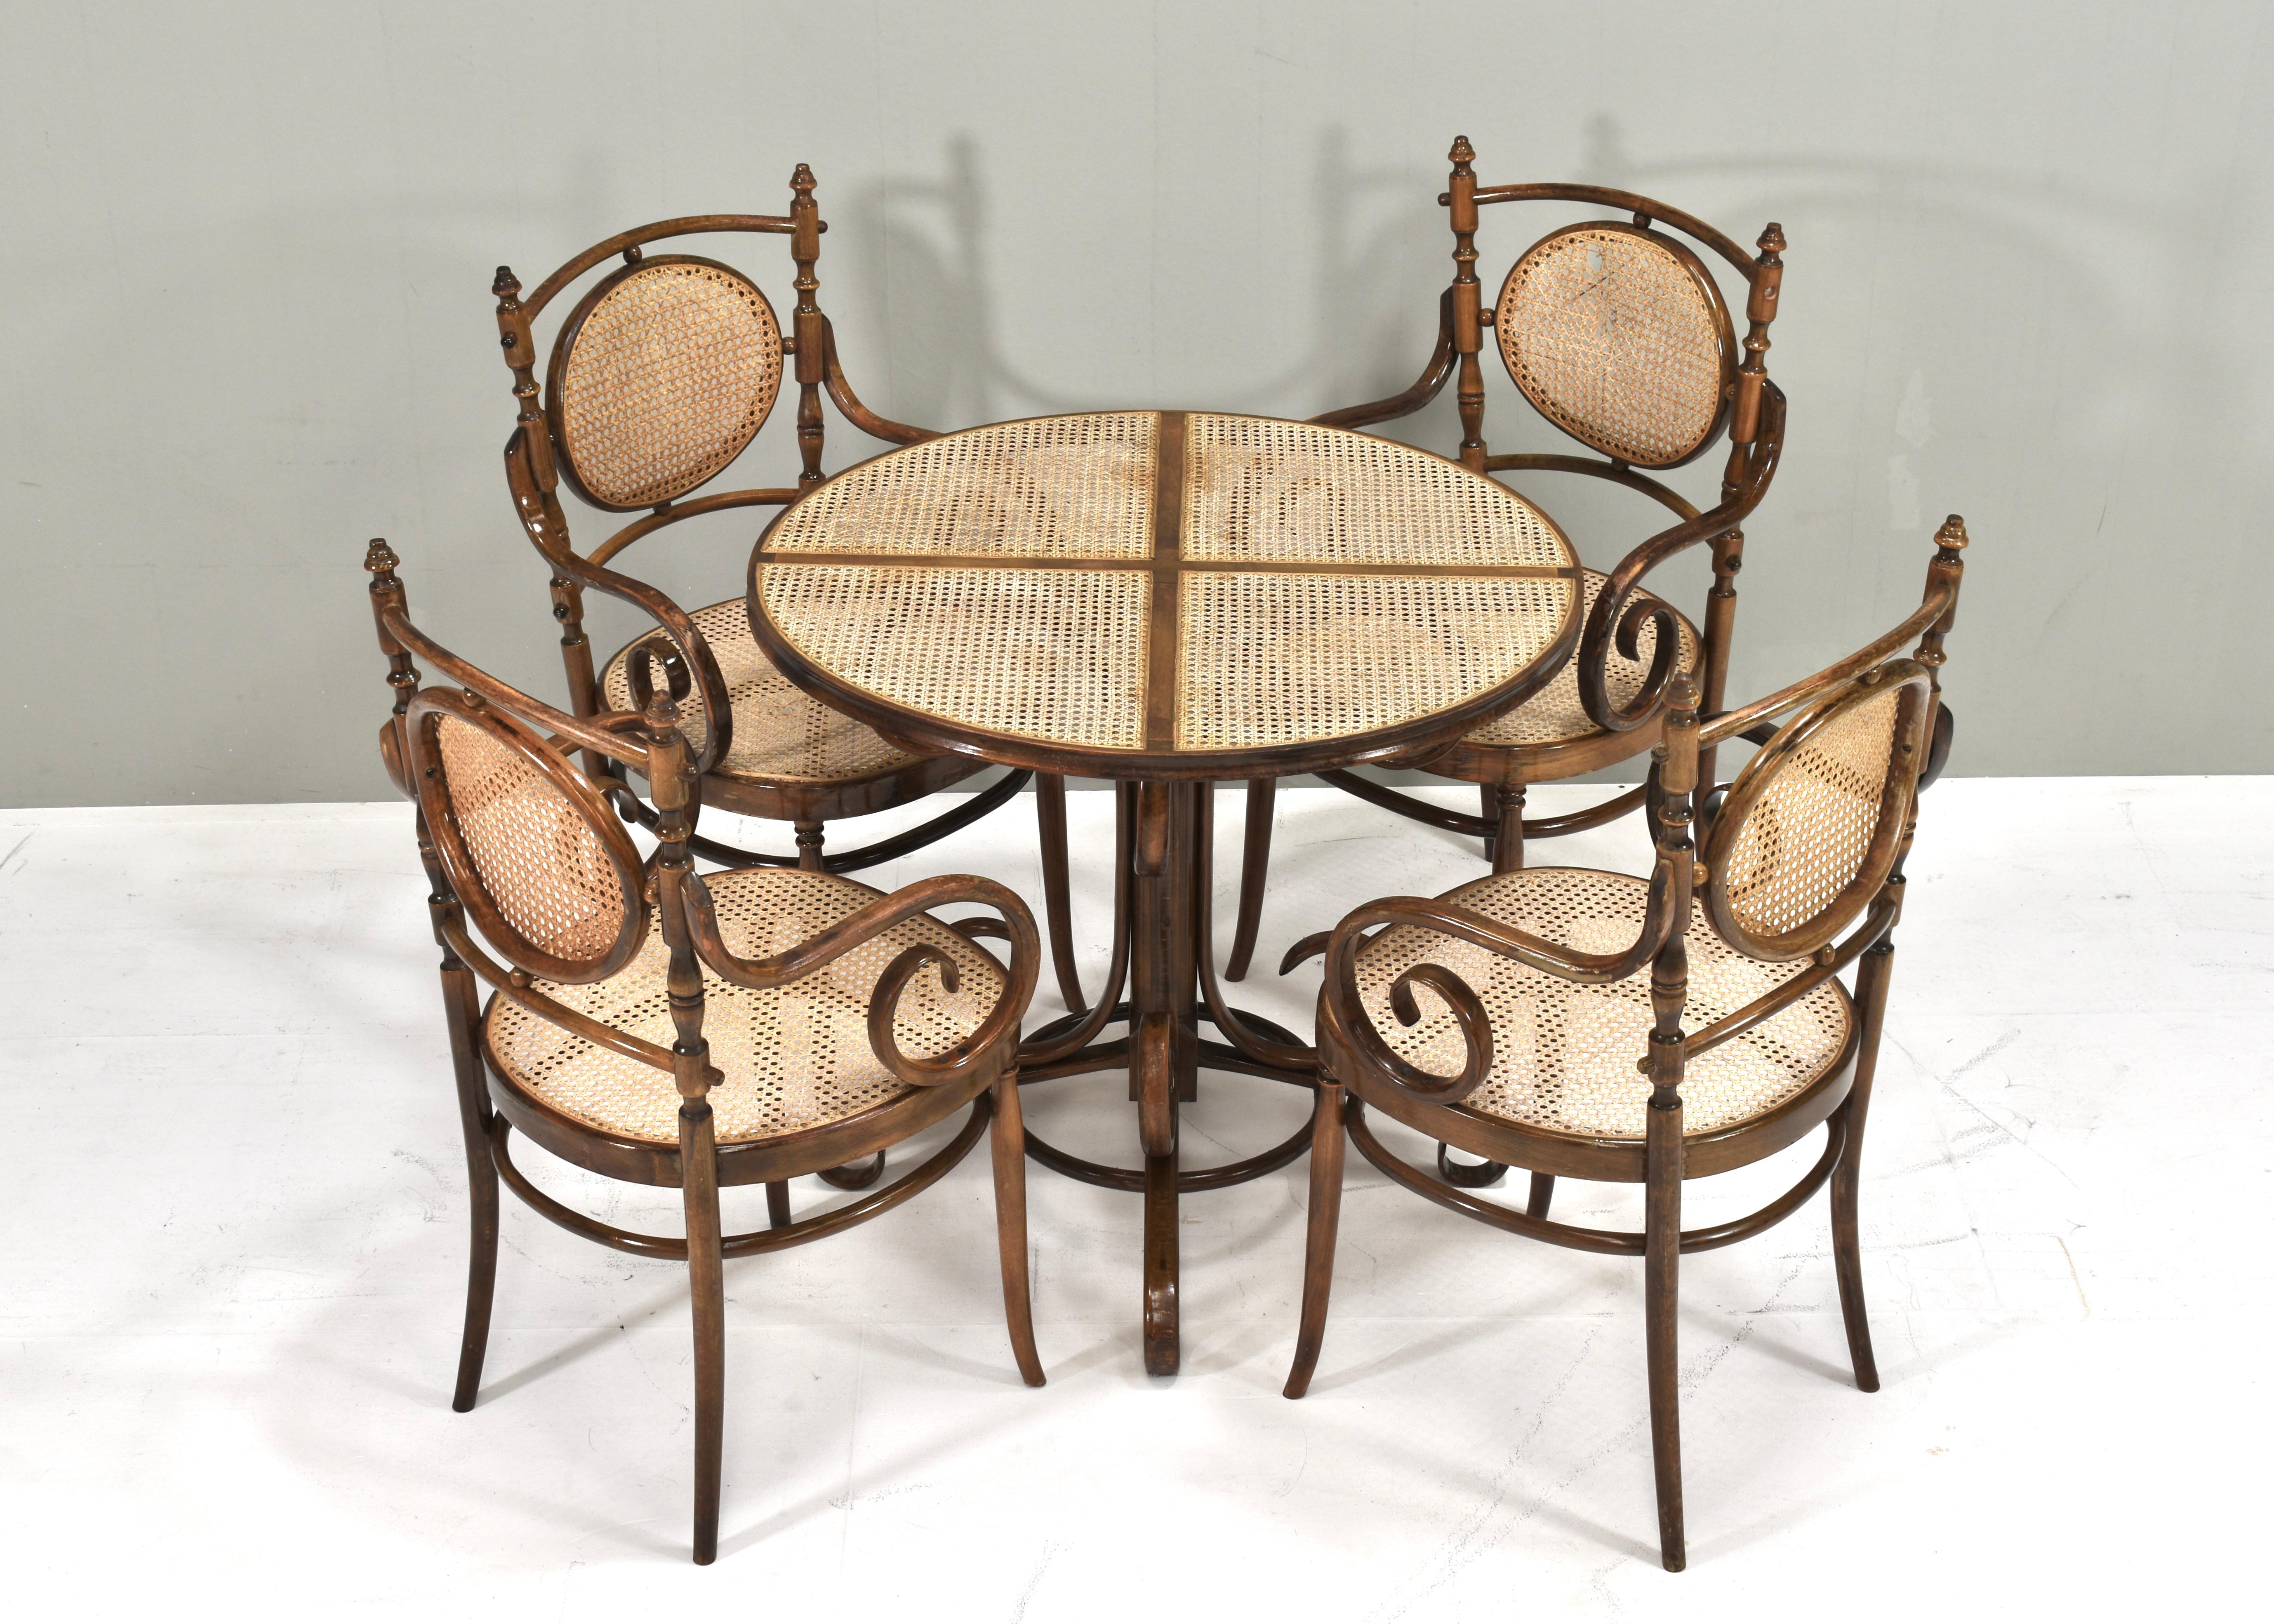 Rococo Revival Early Michael Thonet N.17 Bistro Dining Set in Bentwood and Cane - Austria For Sale